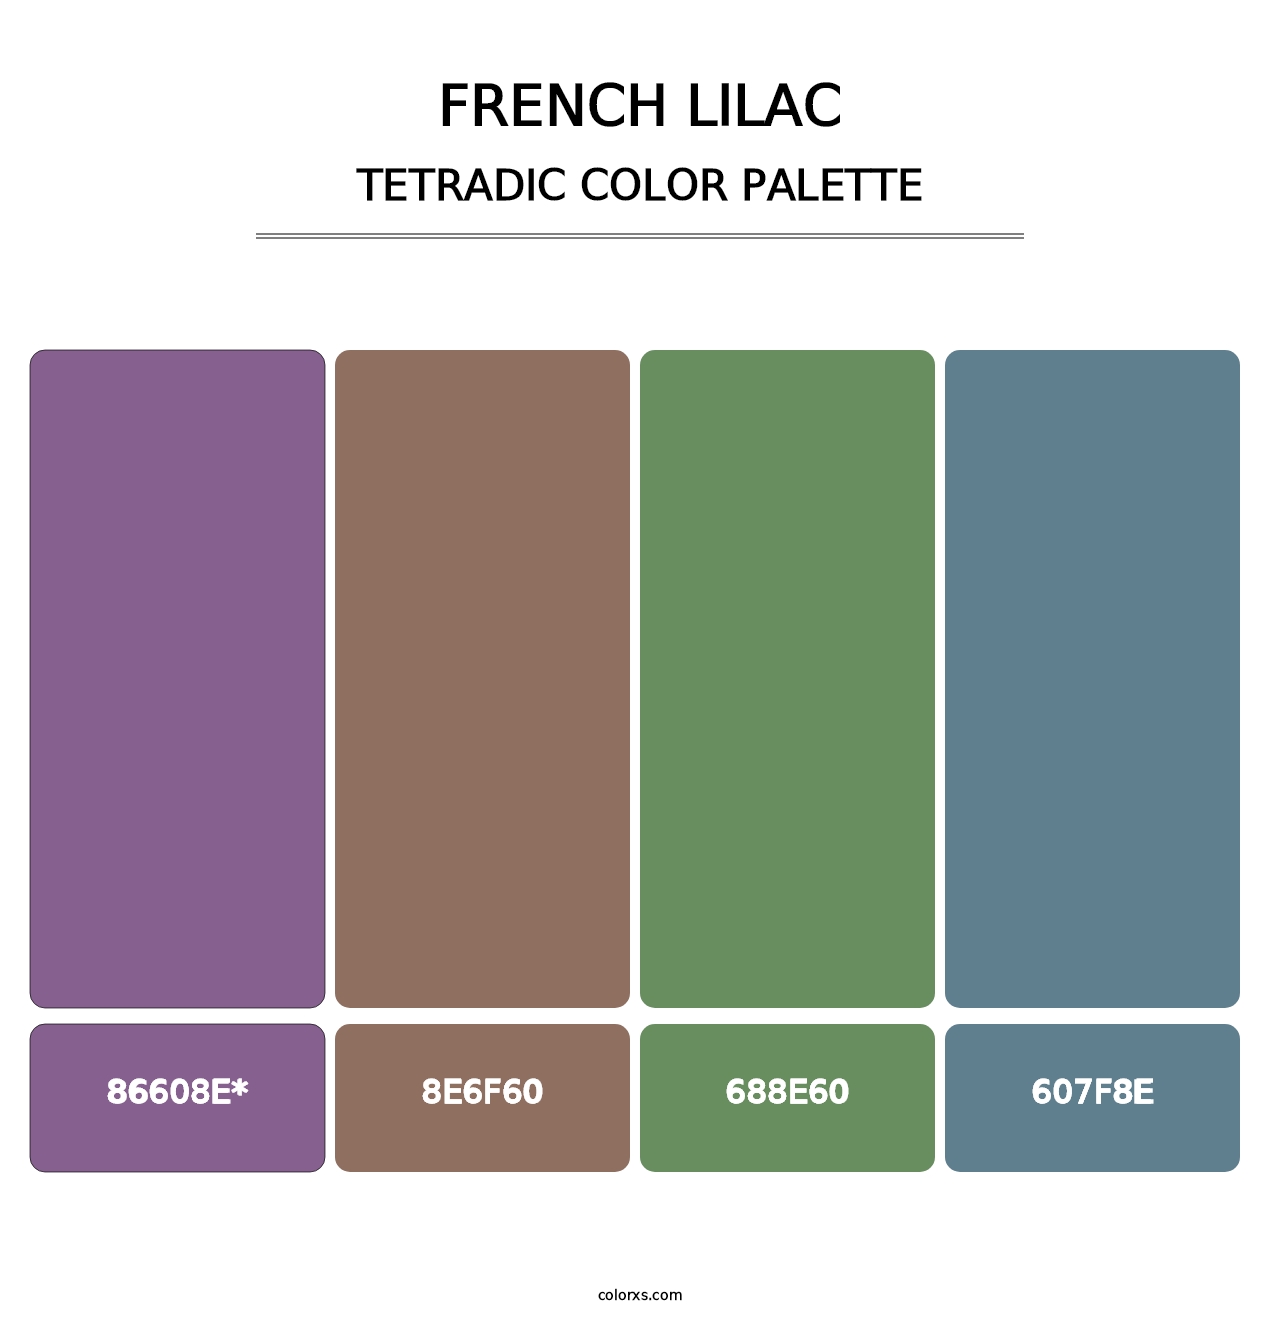 French Lilac - Tetradic Color Palette